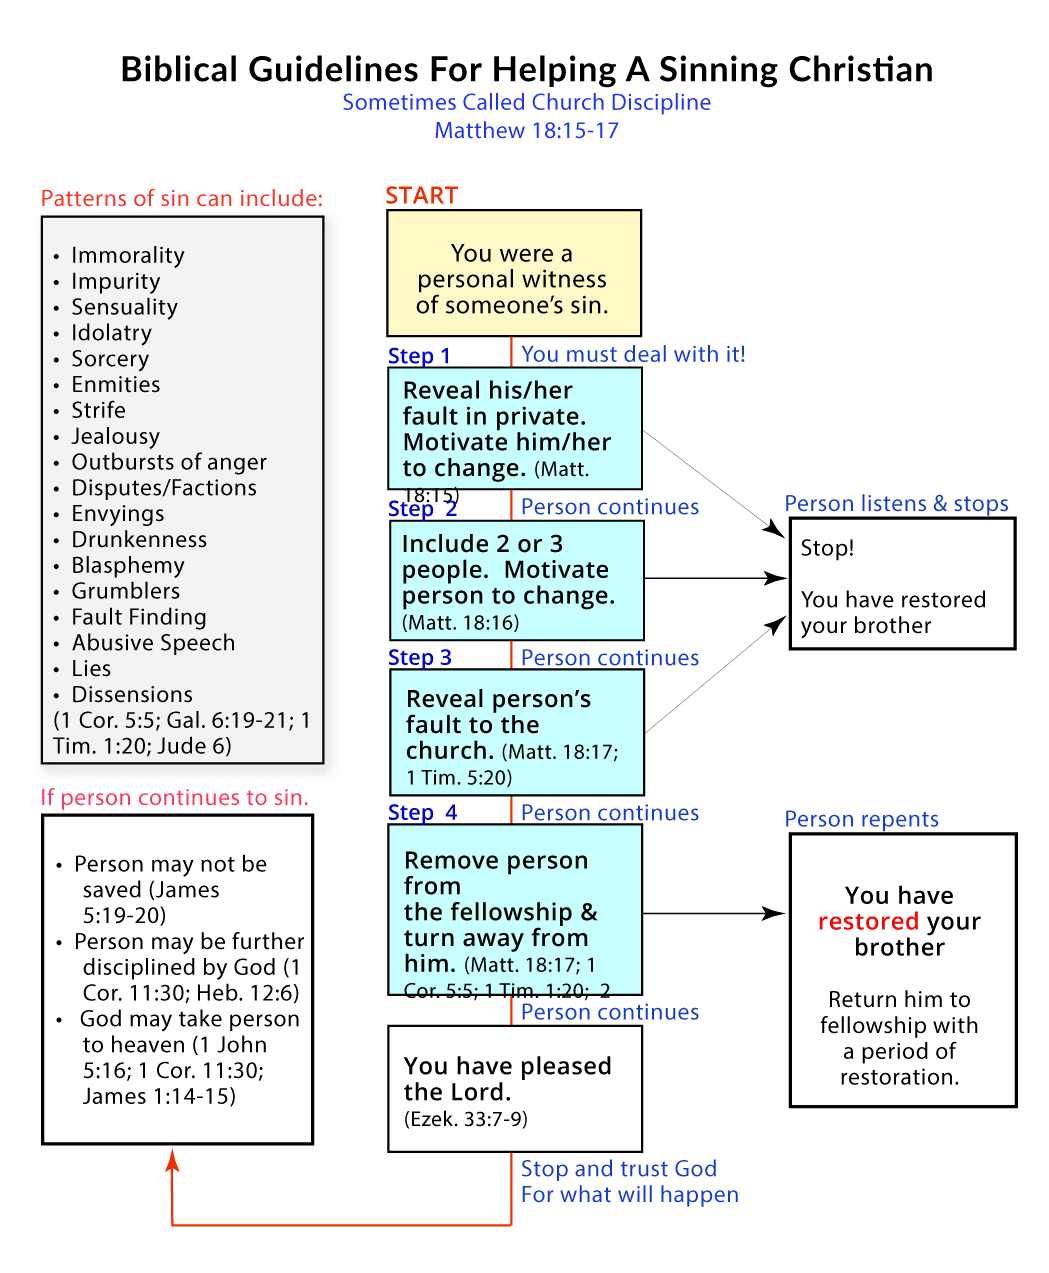 Chart Provides the Steps to Be Followed In Church Discipline